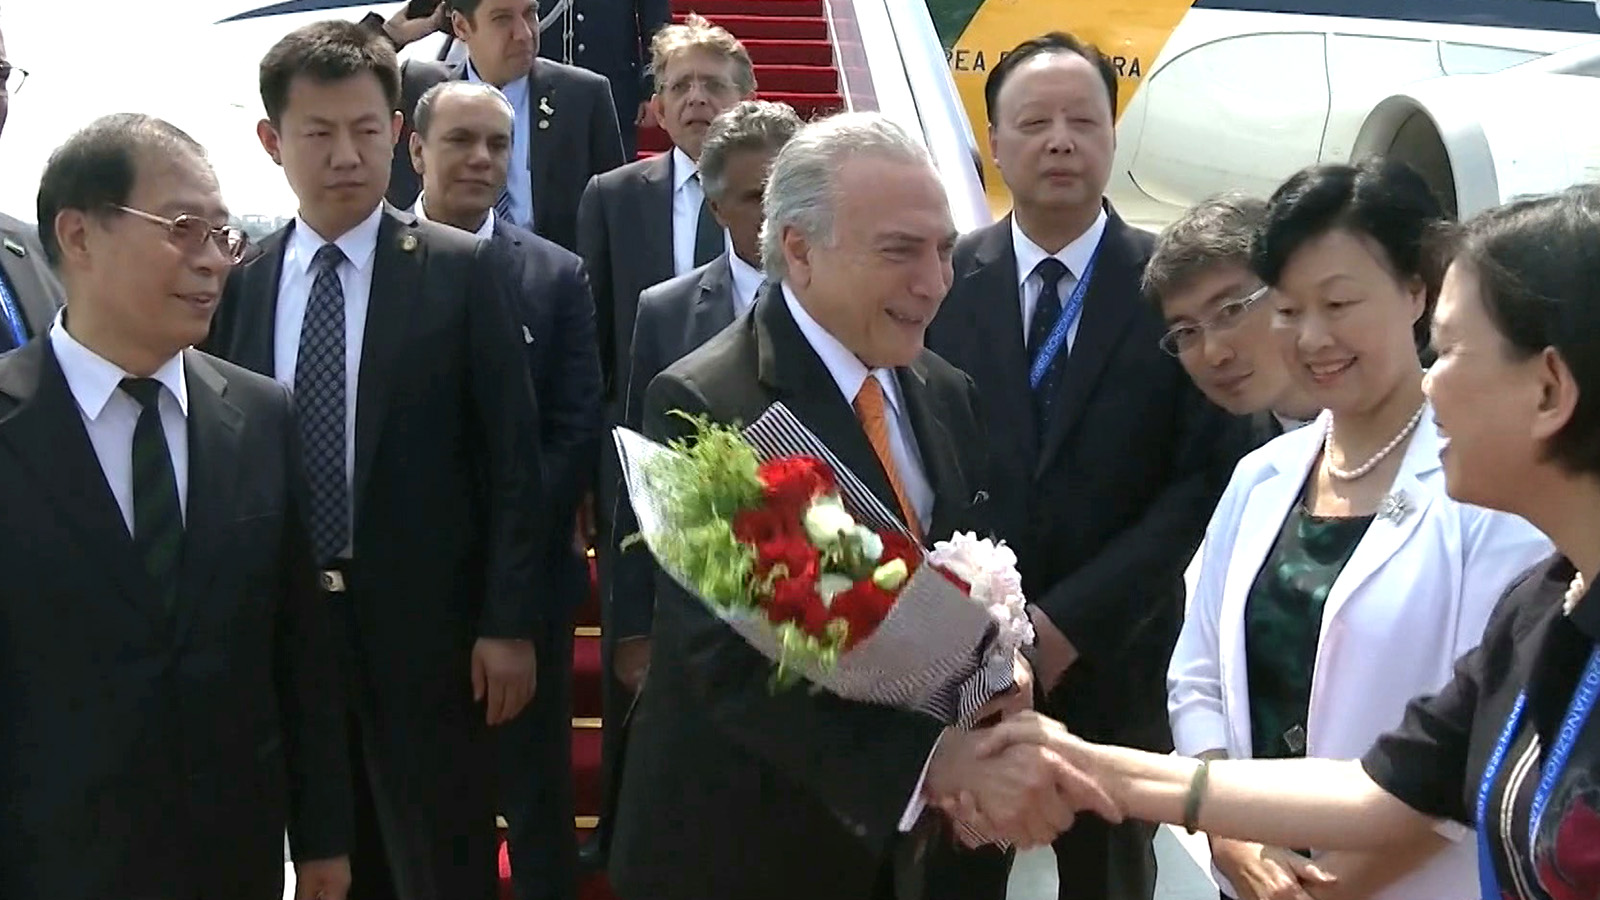 World leaders arrive in China ahead of G20 summit